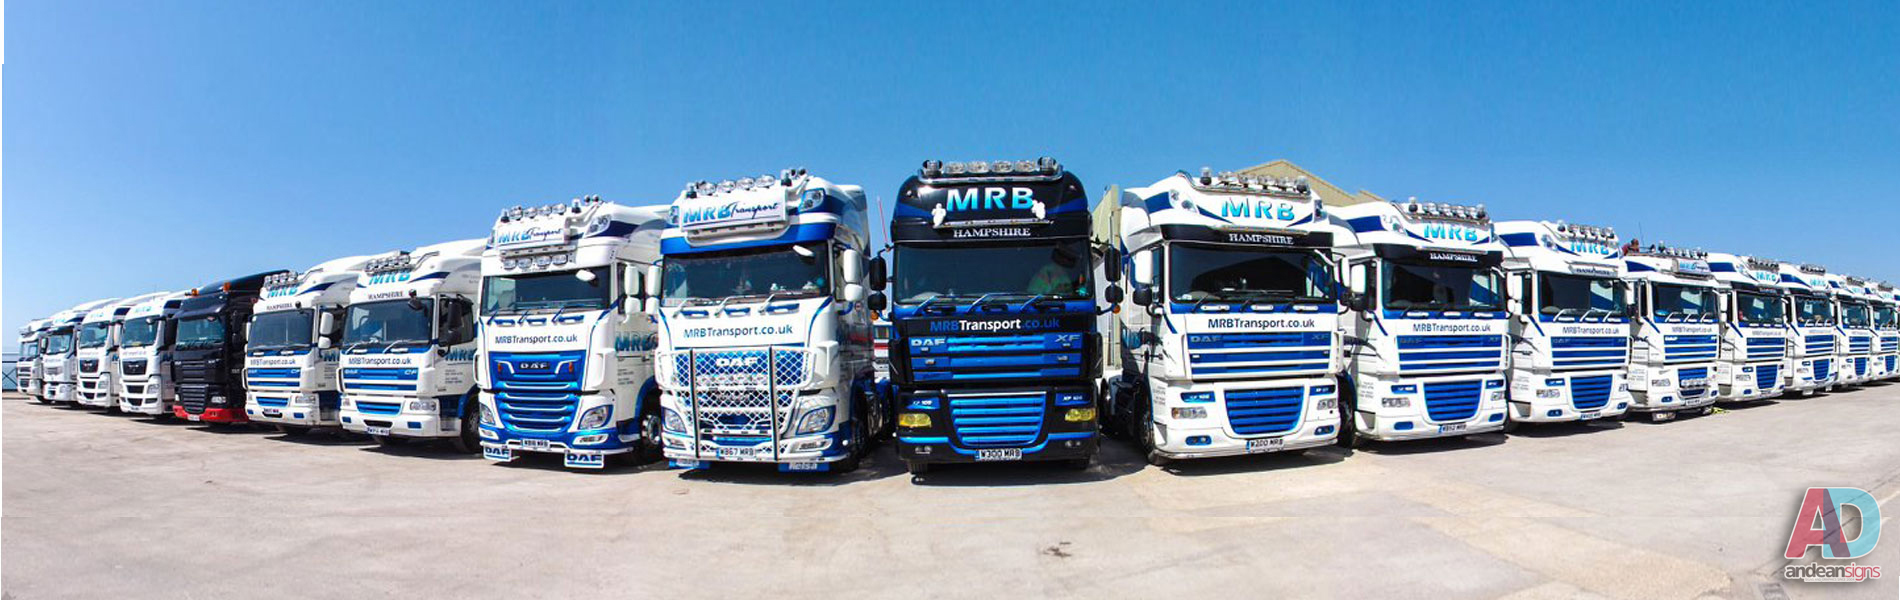 Mrb Transport Fleet with vinyl cut lettering and digitally printed graphics